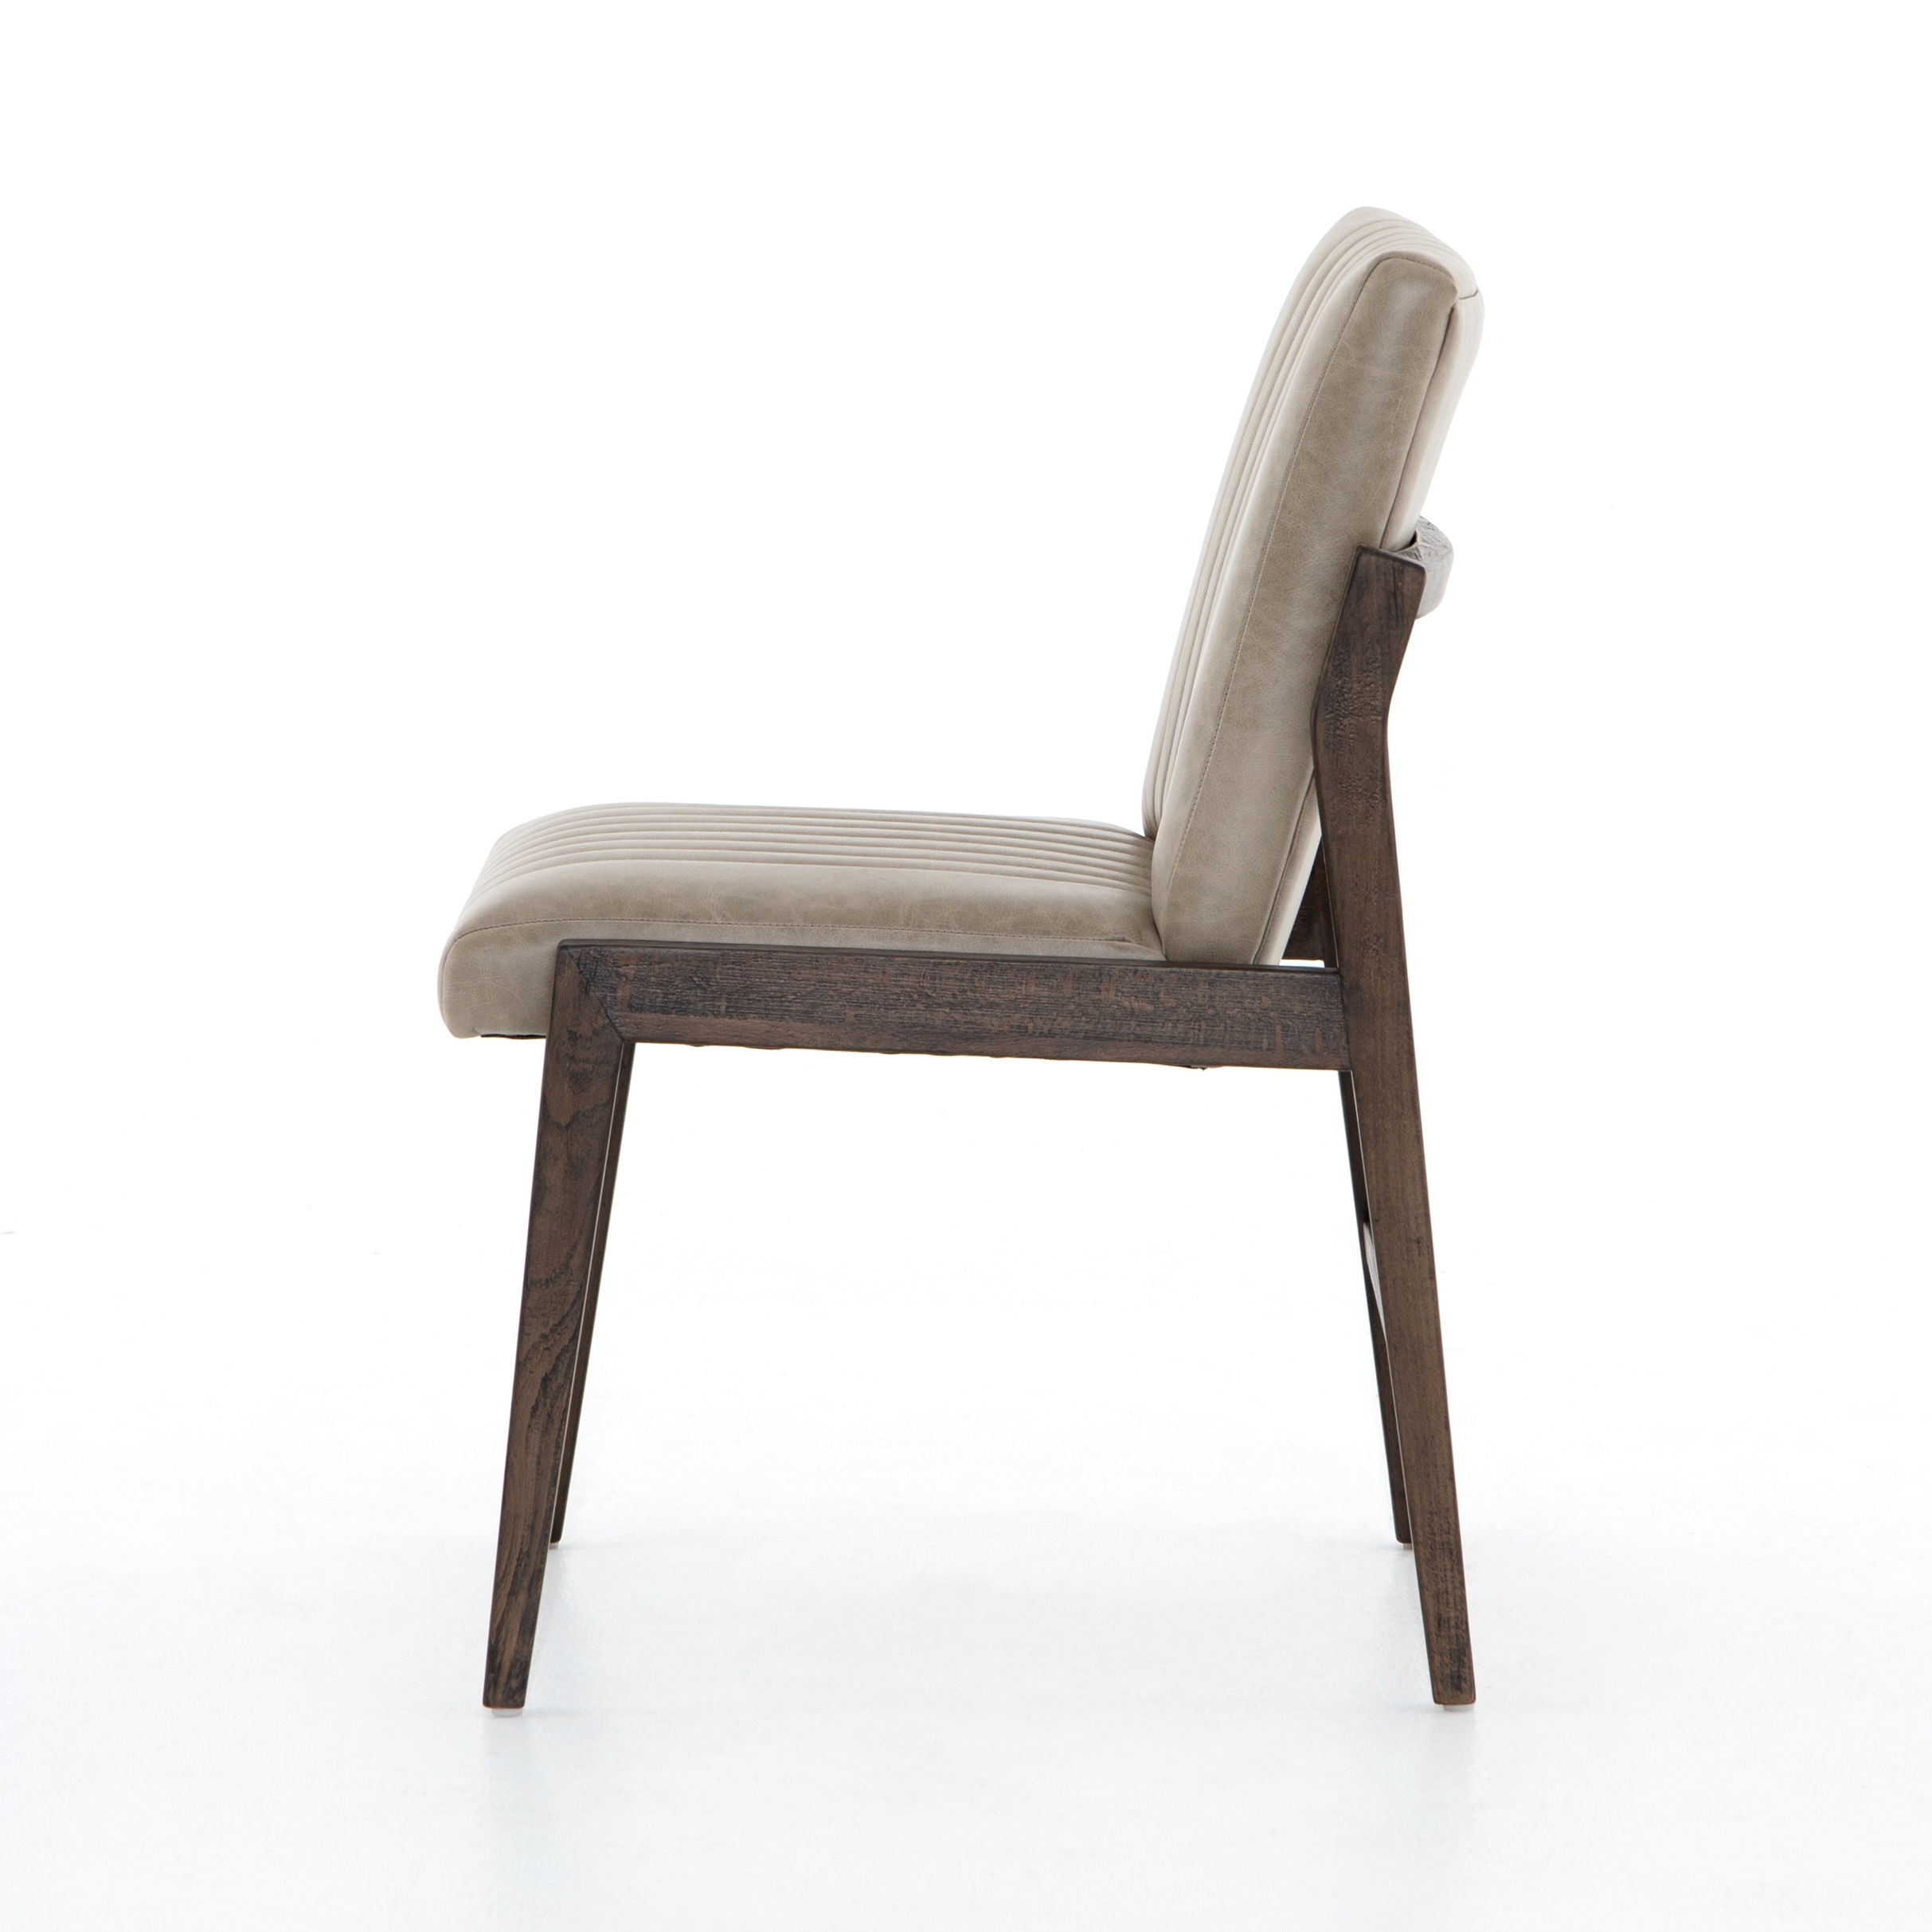 Alice Dining Chair-Sonoma Grey - Image 4